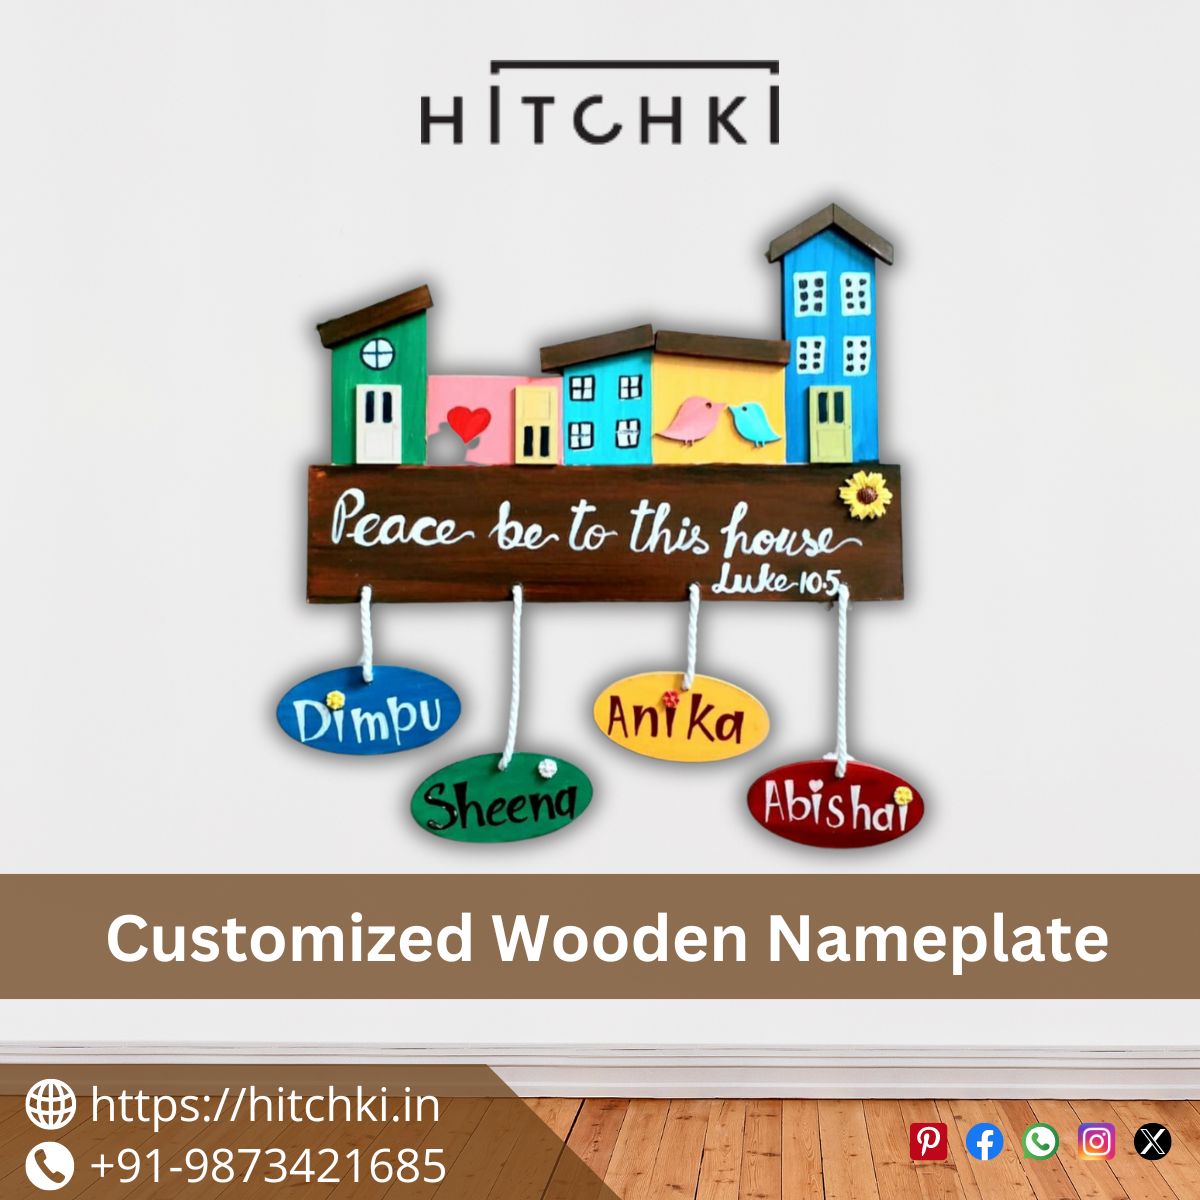 Custom Wooden Nameplates for a Personal Touch